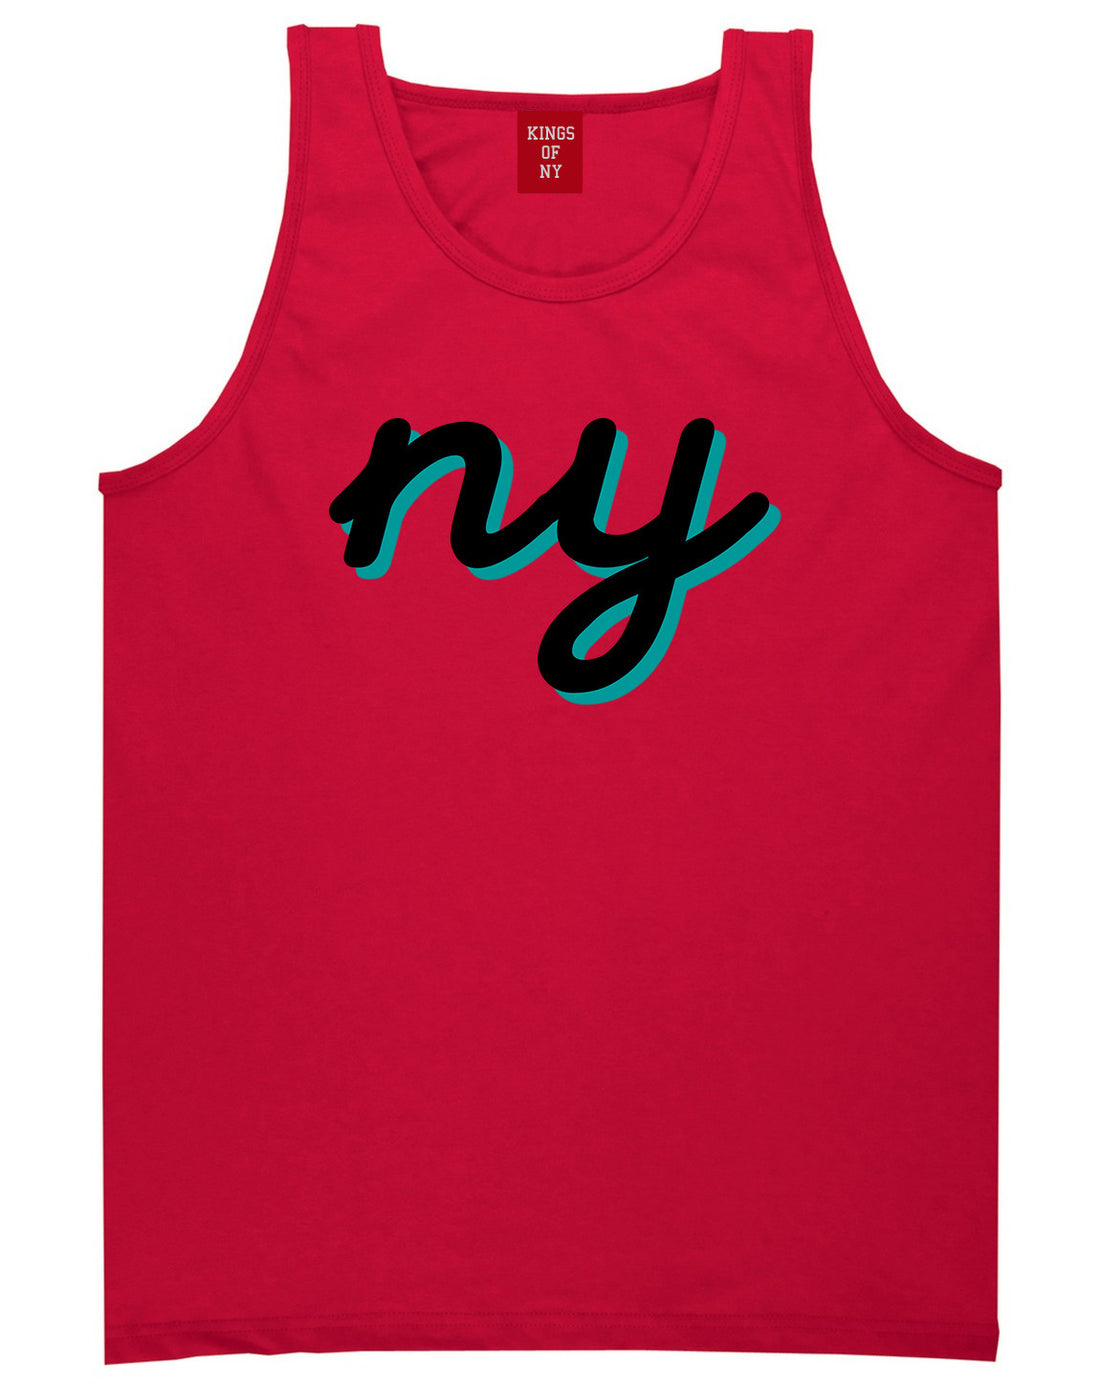 NY lower case script Tank Top in Red